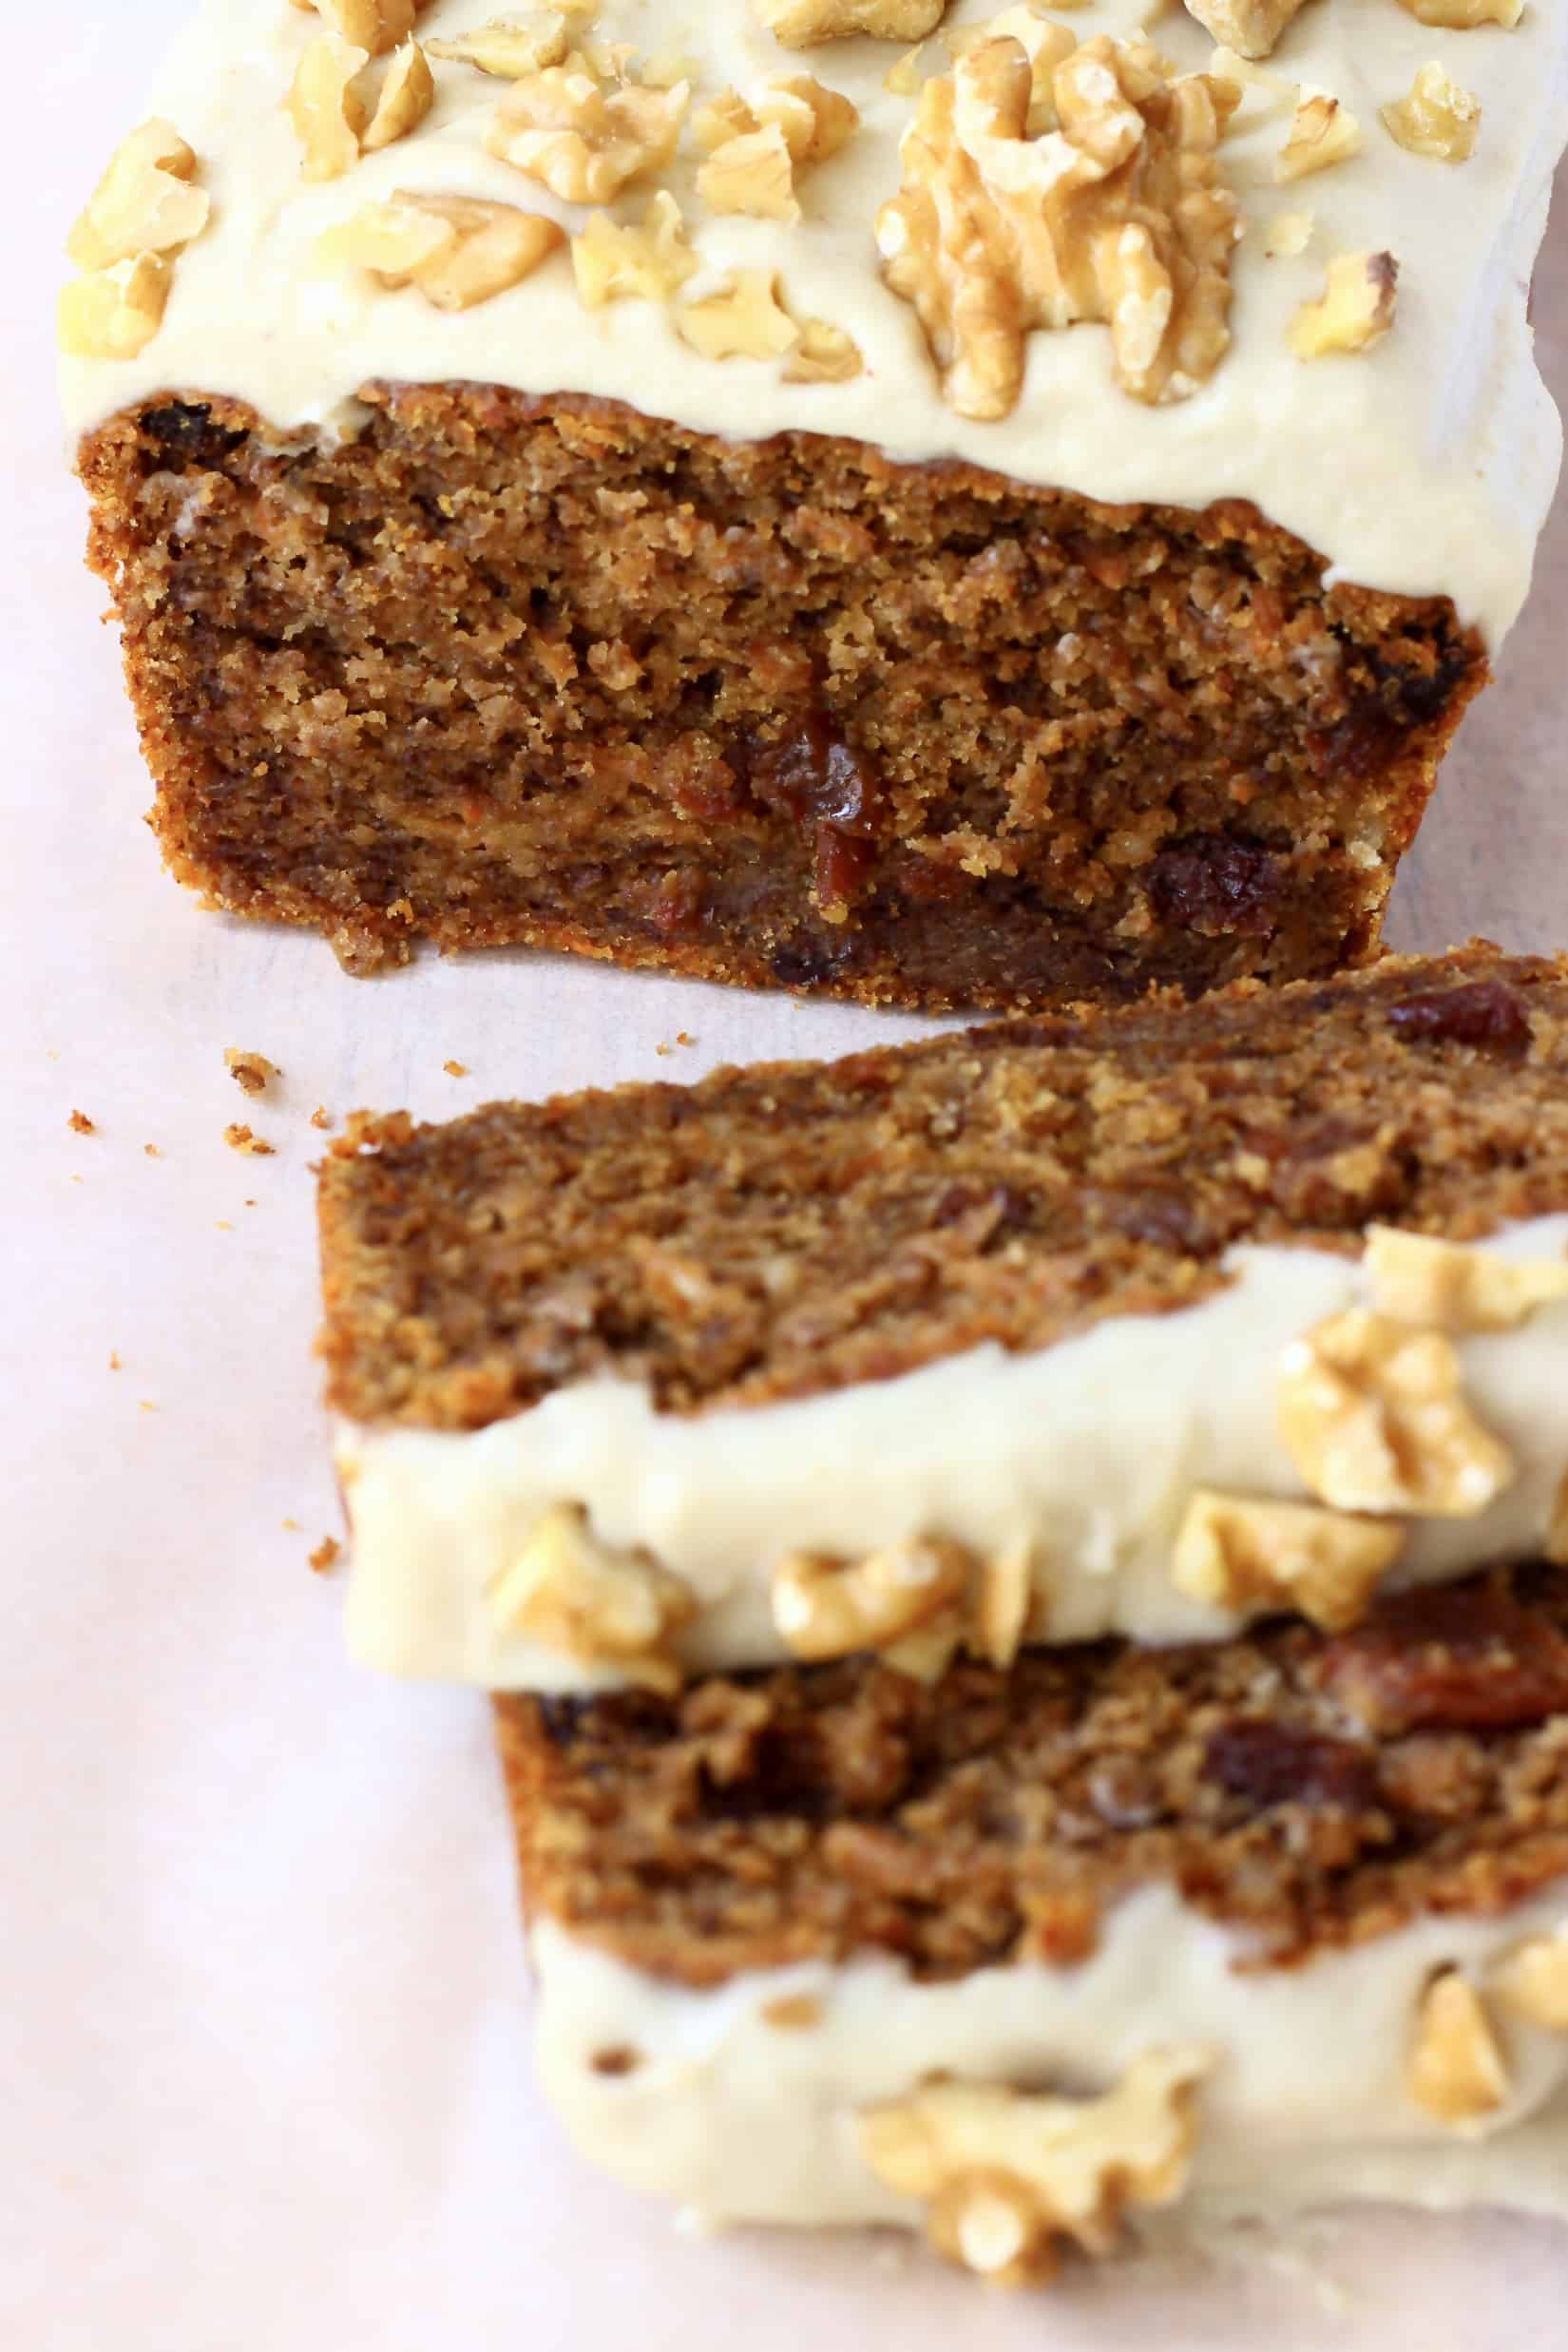 A loaf of vegan carrot bread topped with frosting and walnuts with two slices next to it